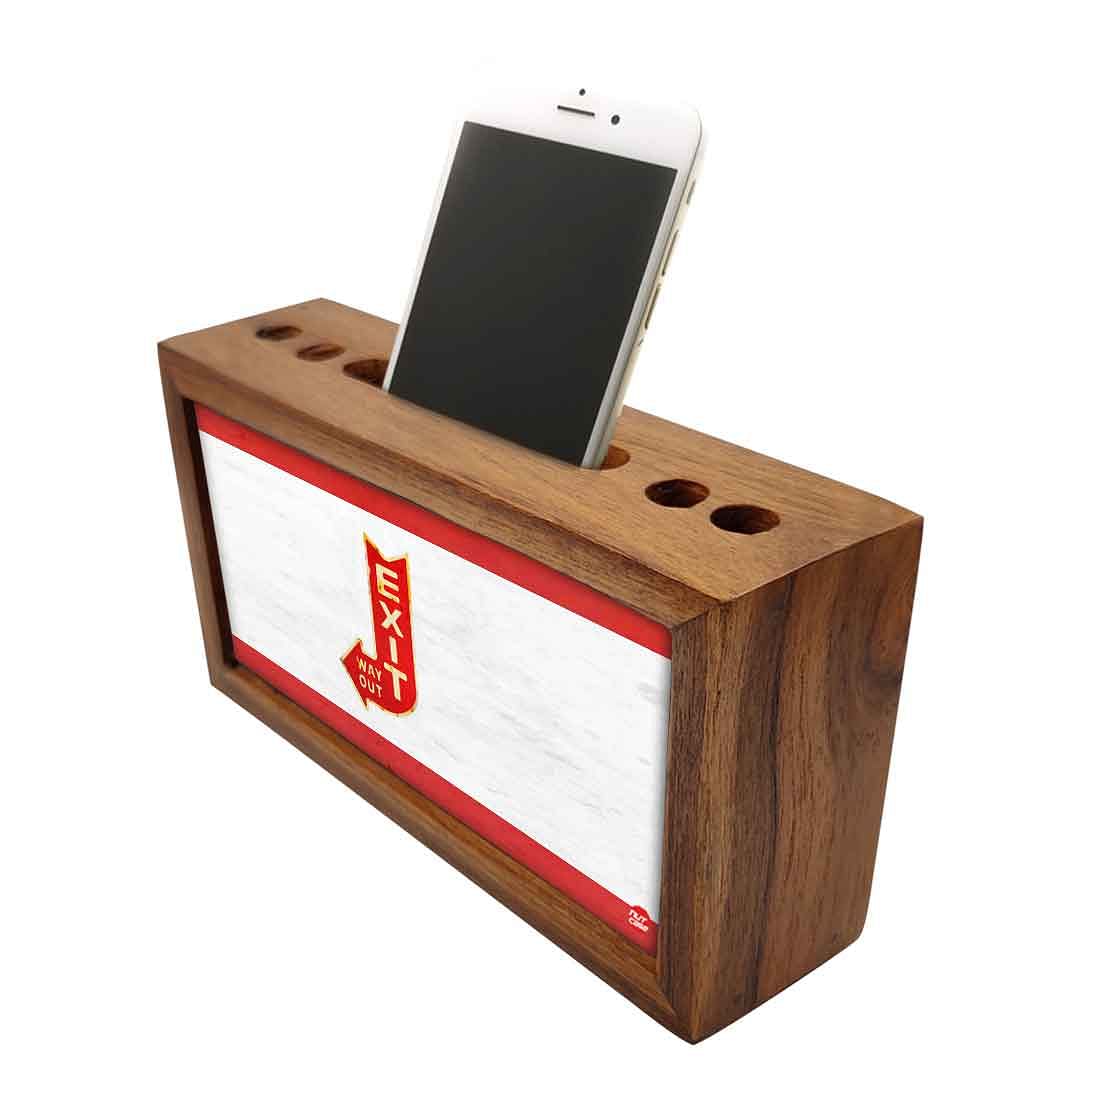 Wooden Stationery Organiser Pen Mobile Stand - Exit Nutcase